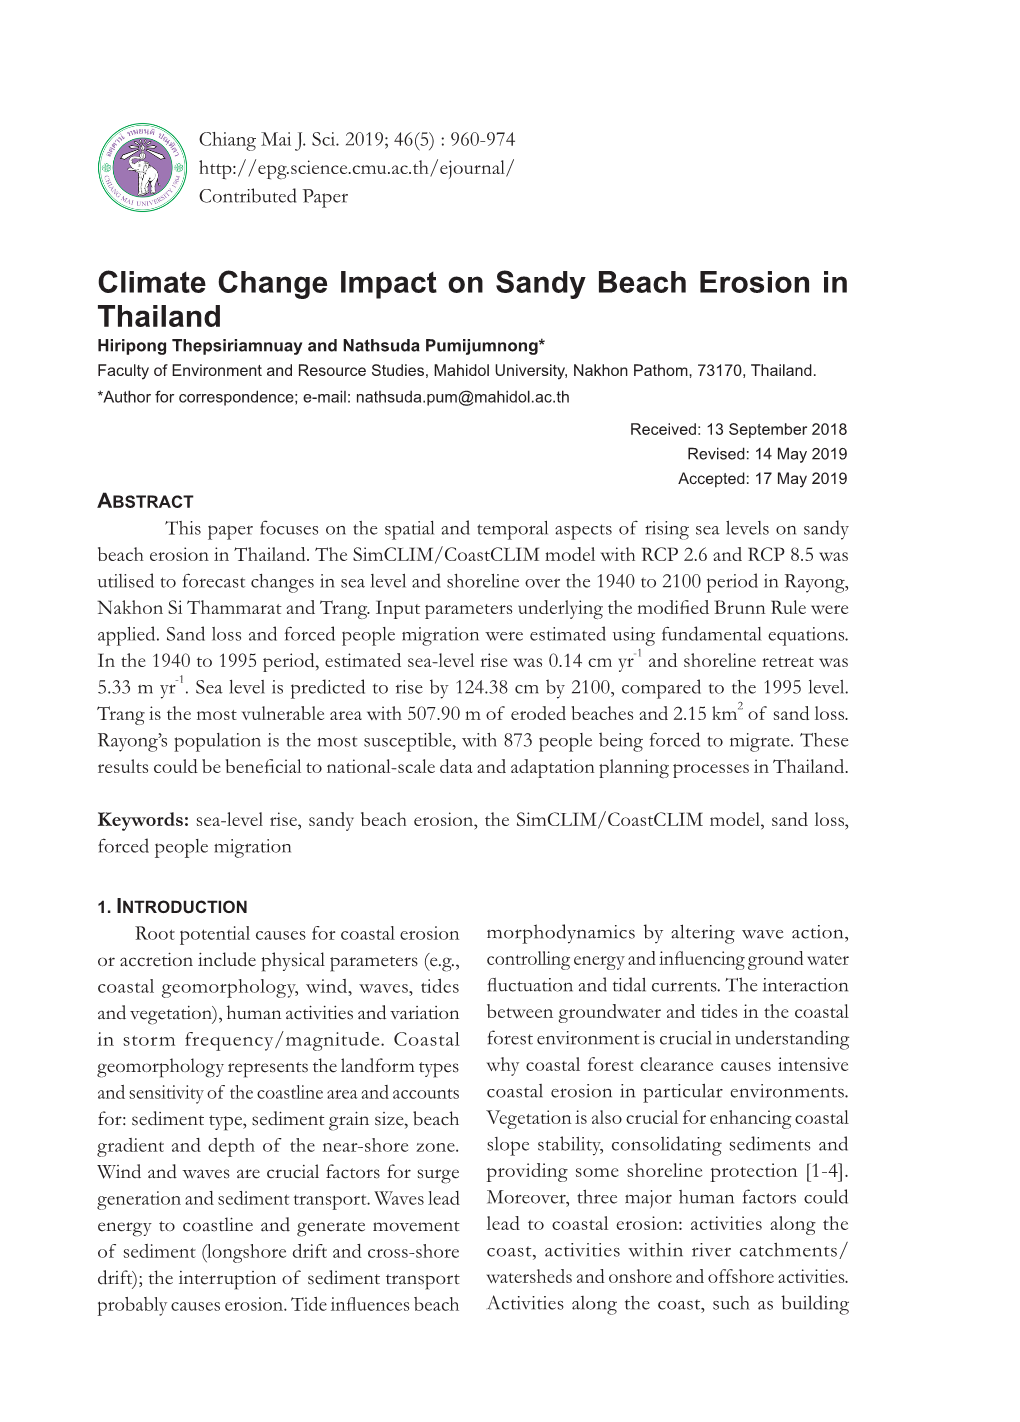 Climate Change Impact on Sandy Beach Erosion in Thailand